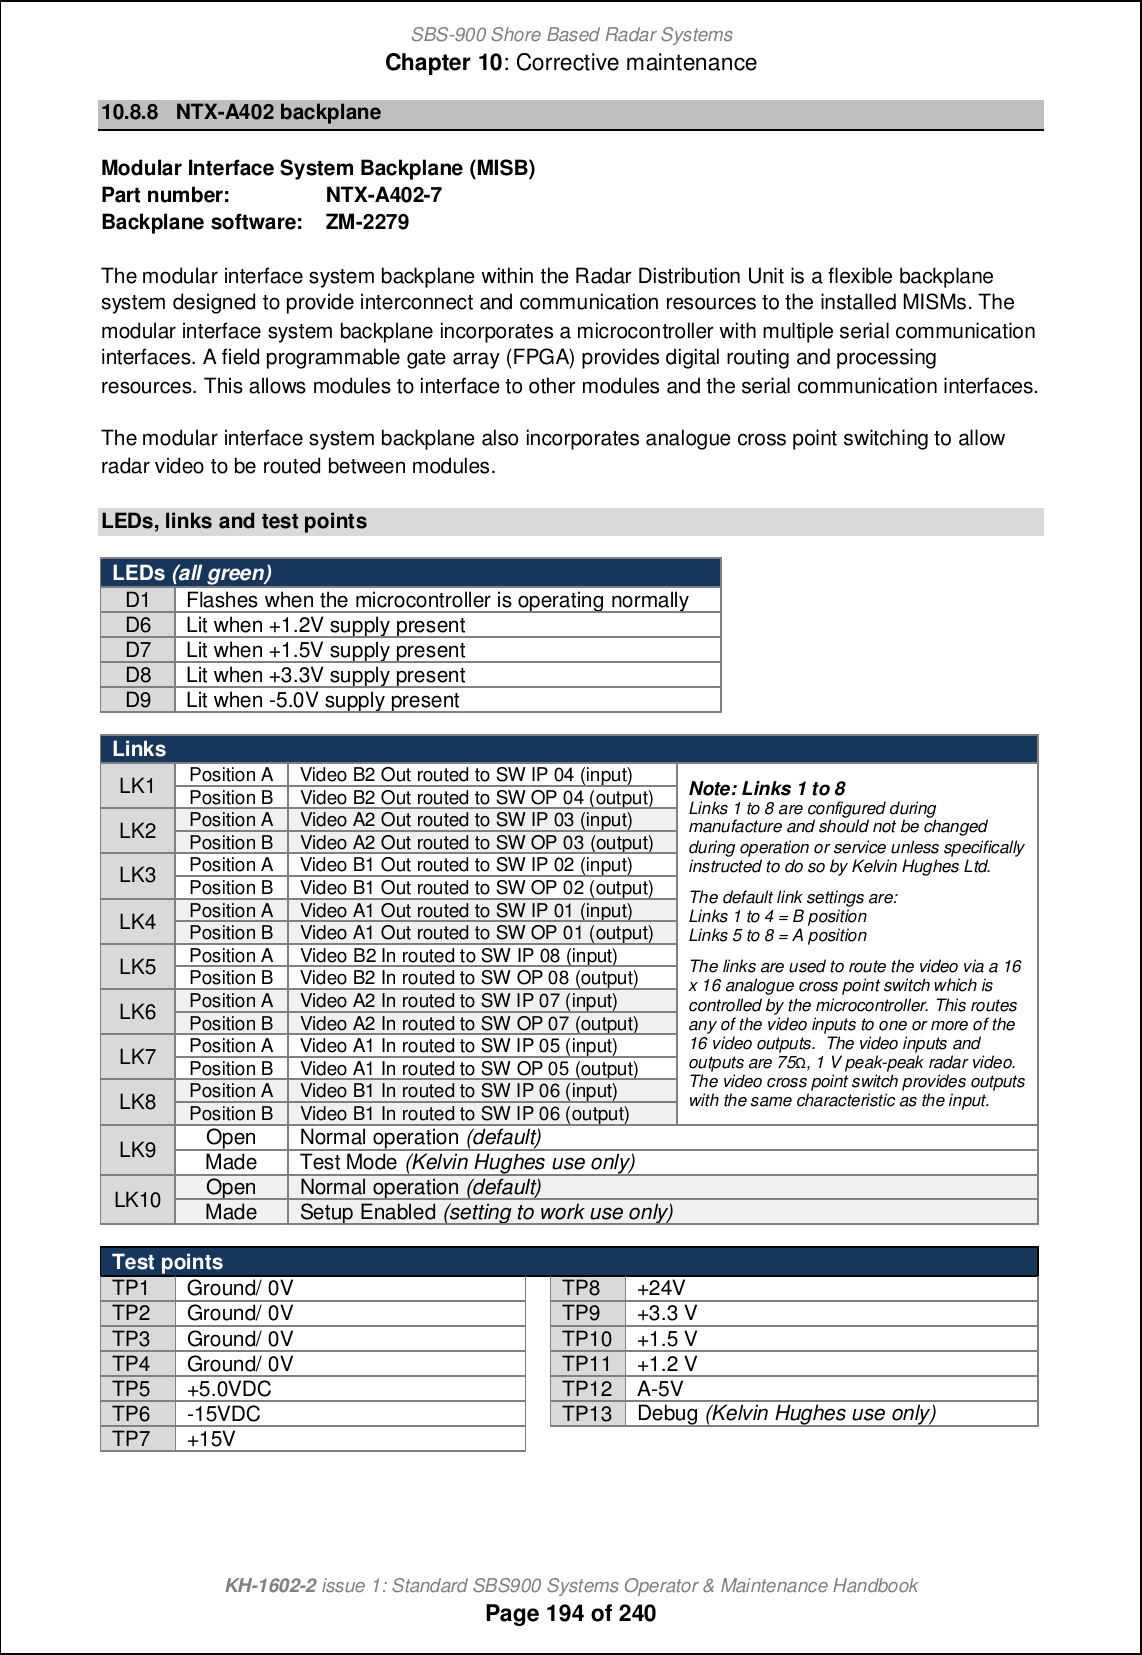 SBS-900 Shore Based Radar SystemsChapter 10: Corrective maintenanceKH-1602-2 issue 1: Standard SBS900 Systems Operator &amp; Maintenance HandbookPage 194 of 24010.8.8 NTX-A402 backplaneModular Interface System Backplane (MISB)Part number: NTX-A402-7Backplane software: ZM-2279The modular interface system backplane within the Radar Distribution Unit is a flexible backplanesystem designed to provide interconnect and communication resources to the installed MISMs. Themodular interface system backplane incorporates a microcontroller with multiple serial communicationinterfaces. A field programmable gate array (FPGA) provides digital routing and processingresources. This allows modules to interface to other modules and the serial communication interfaces.The modular interface system backplane also incorporates analogue cross point switching to allowradar video to be routed between modules.LEDs, links and test pointsLEDs (all green)D1Flashes whenthemicrocontroller is operatingnormallyD6Lit when +1.2V supplypresentD7Lit when +1.5V supply presentD8Lit when +3.3V supply presentD9Lit when-5.0V supply presentLinksLK1 Position A Video B2 Out routed to SW IP 04 (input) Note: Links 1 to 8Links 1 to 8 are configured duringmanufacture and should not be changedduring operation or service unless specificallyinstructed to do so by Kelvin Hughes Ltd.The default link settings are:Links 1 to 4 = B positionLinks 5 to 8 = A positionThe links are used to route the video via a 16x 16 analogue cross point switch which iscontrolled by the microcontroller. This routesany of the video inputs to one or more of the16 video outputs. The video inputs andoutputs are 75|, 1 V peak-peak radar video.The video cross point switch provides outputswith the same characteristic as the input.Position BVideo B2 Out routed to SW OP 04 (output)LK2 Position A Video A2 Out routed to SW IP 03 (input)Position BVideo A2 Out routed to SW OP 03(output)LK3 Position A Video B1 Out routed to SW IP 02 (input)Position B Video B1 Out routed to SW OP 02 (output)LK4Position AVideo A1 Out routed to SW IP 01 (input)Position B Video A1 Out routed to SW OP 01 (output)LK5Position AVideoB2 In routed to SW IP 08 (input)Position B Video B2 In routed to SW OP 08 (output)LK6 Position A Video A2 In routed to SW IP 07 (input)Position BVideo A2 In routed to SW OP 07 (output)LK7 Position A Video A1 In routed to SW IP 05 (input)Position BVideo A1 In routed to SW OP 05 (output)LK8 Position A Video B1 In routed to SW IP 06 (input)Position B Video B1 In routed to SW IP 06 (output)LK9 Open Normal operation (default)Made Test Mode (Kelvin Hughes use only)LK10OpenNormal operation(default)MadeSetup Enabled(setting to work use only)Test pointsTP1 Ground/ 0V TP8 +24VTP2 Ground/ 0V TP9 +3.3 VTP3Ground/ 0VTP10+1.5 VTP4Ground/ 0VTP11+1.2 VTP5+5.0VDCTP12A-5VTP6-15VDCTP13Debug (Kelvin Hughes use only)TP7+15V